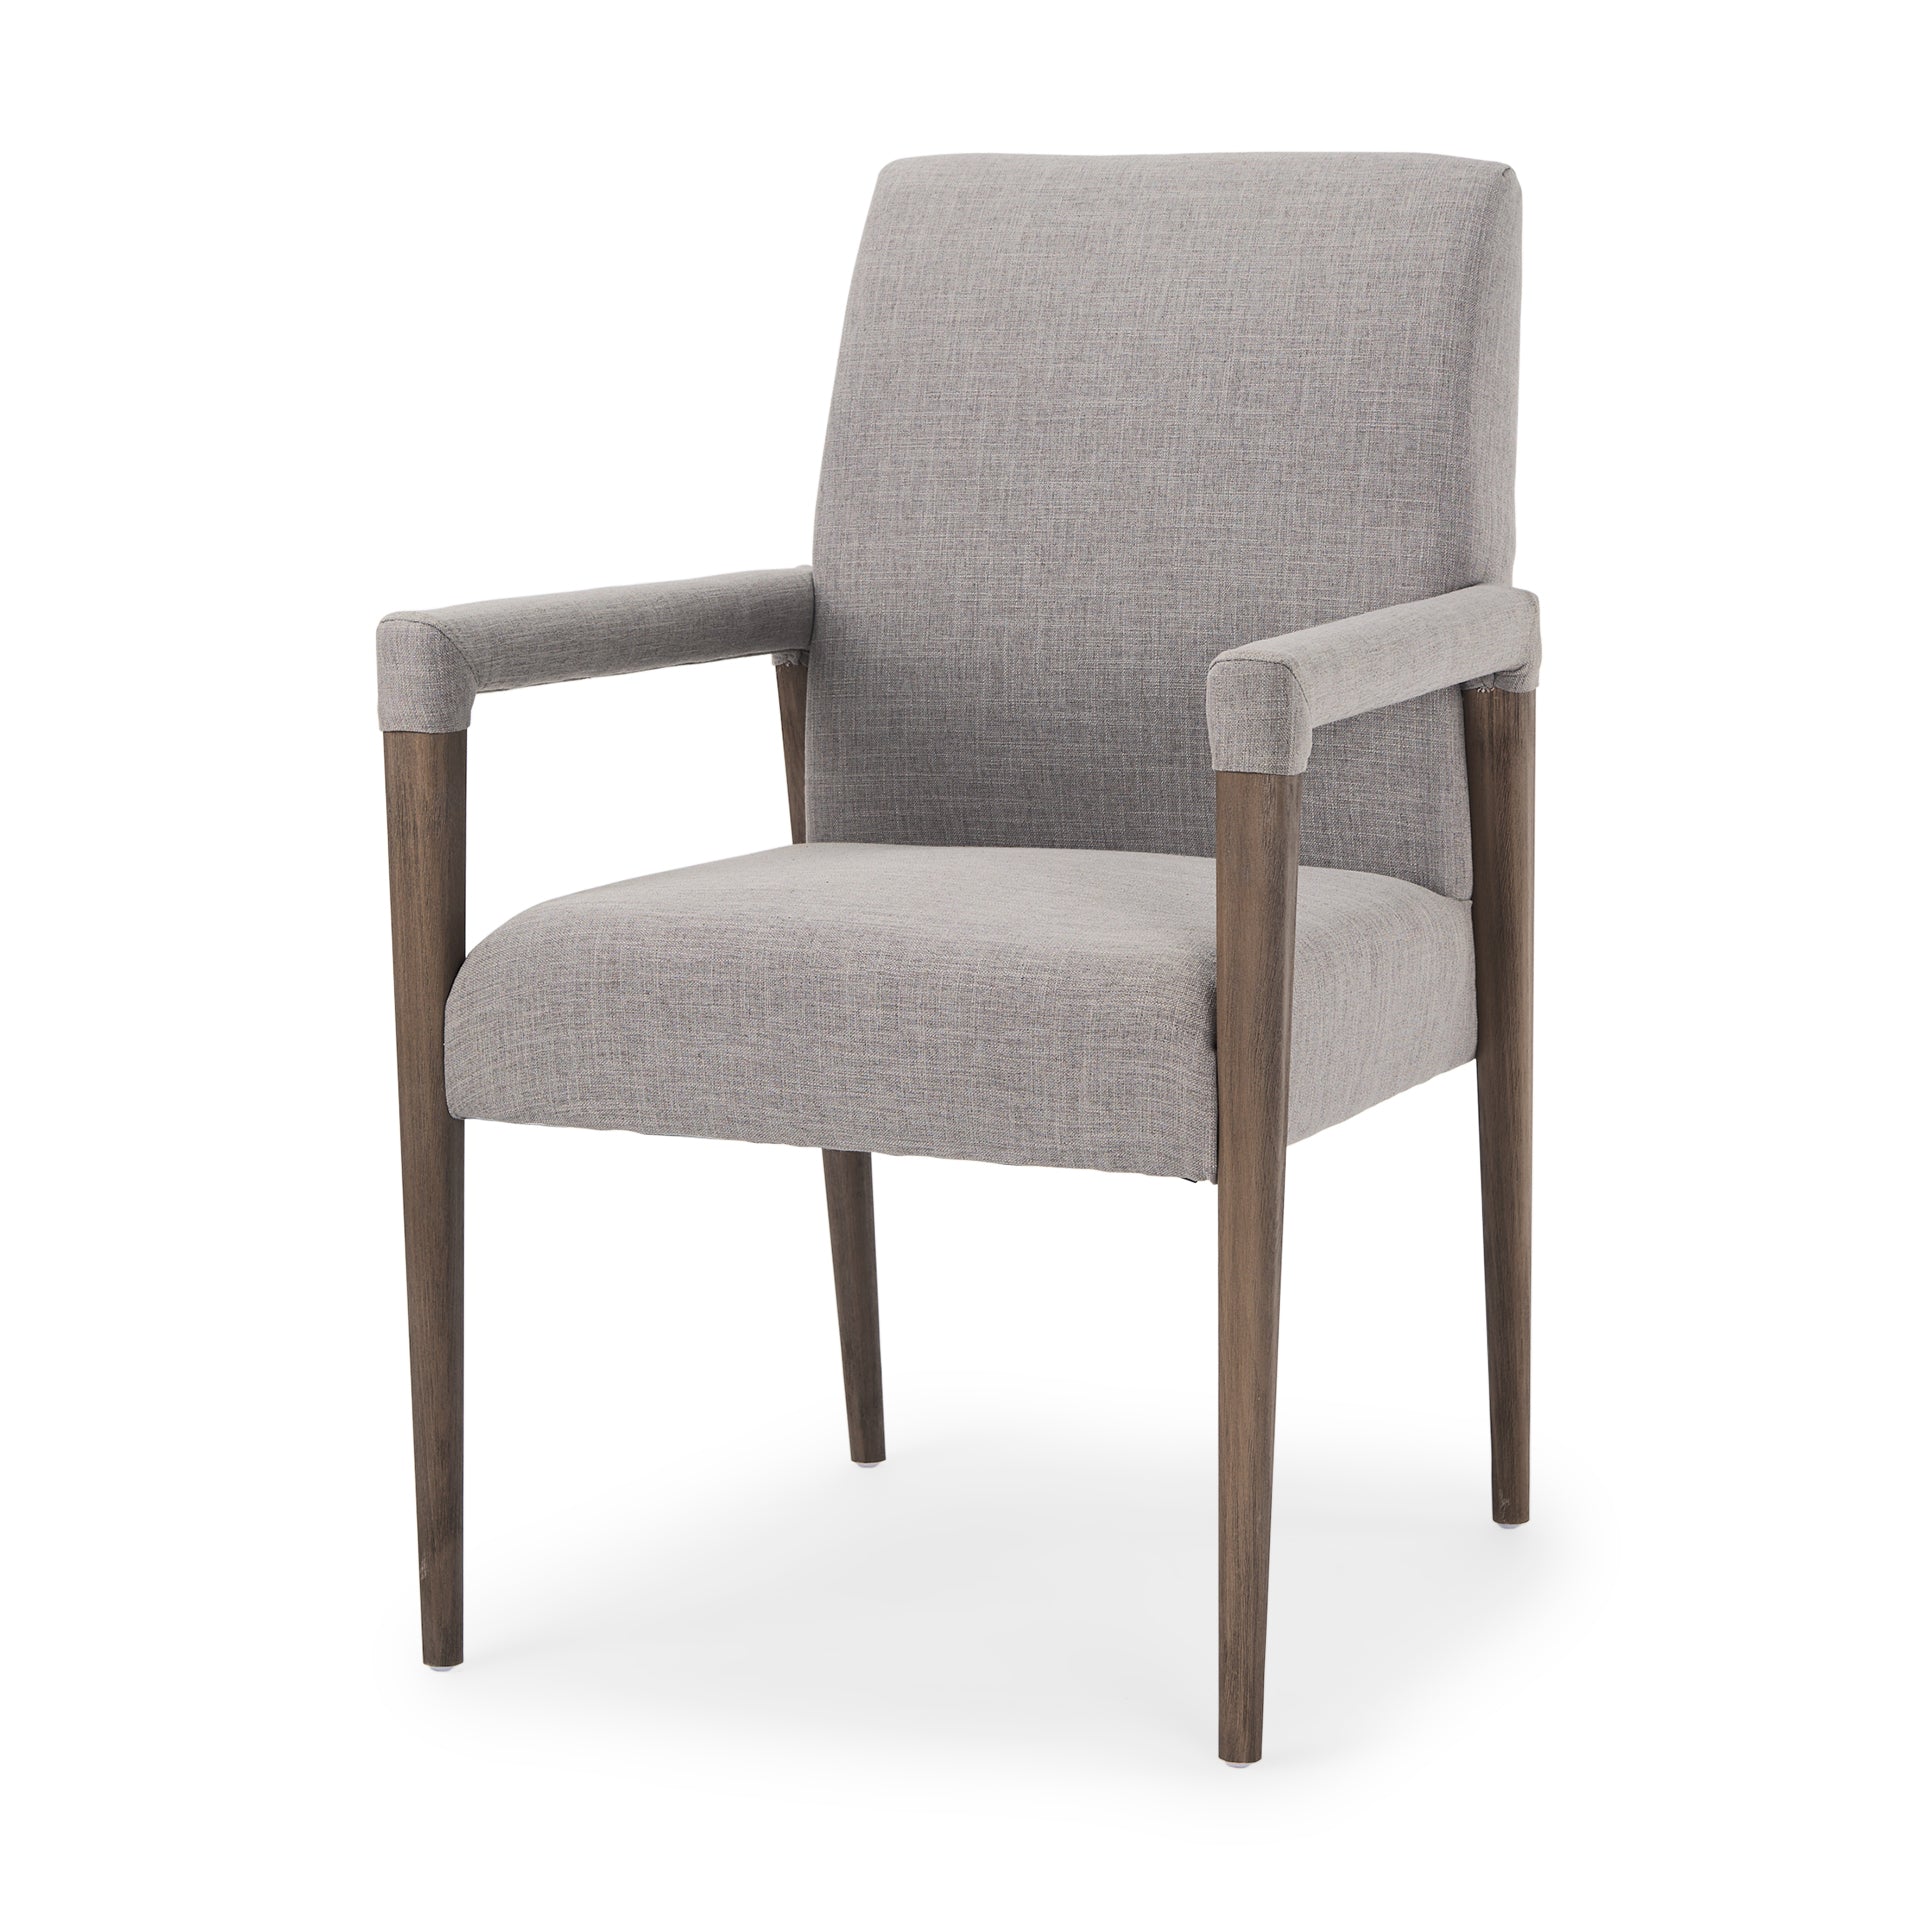 PALISADES GRAY DINING ARMCHAIR - SET OF 2